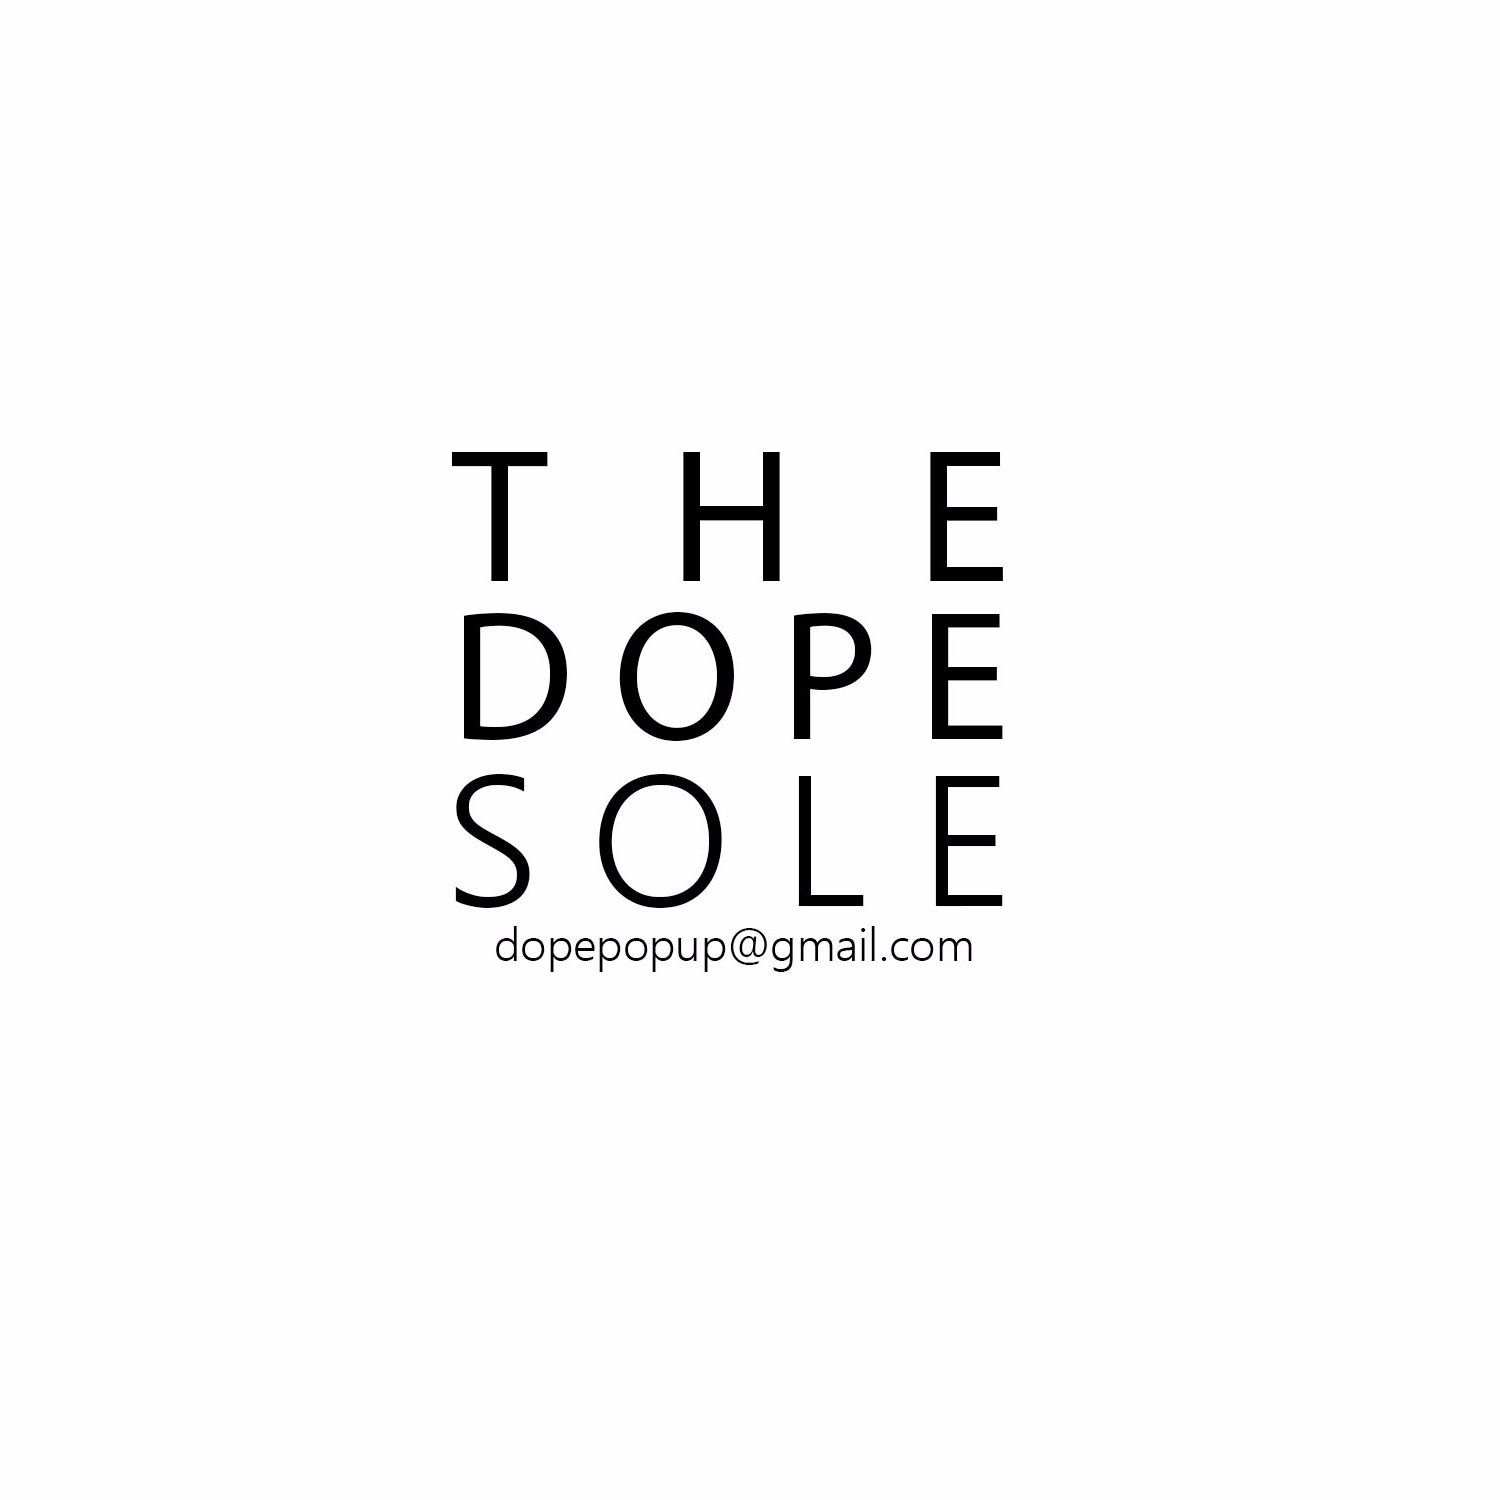 THE DOPE SOLE